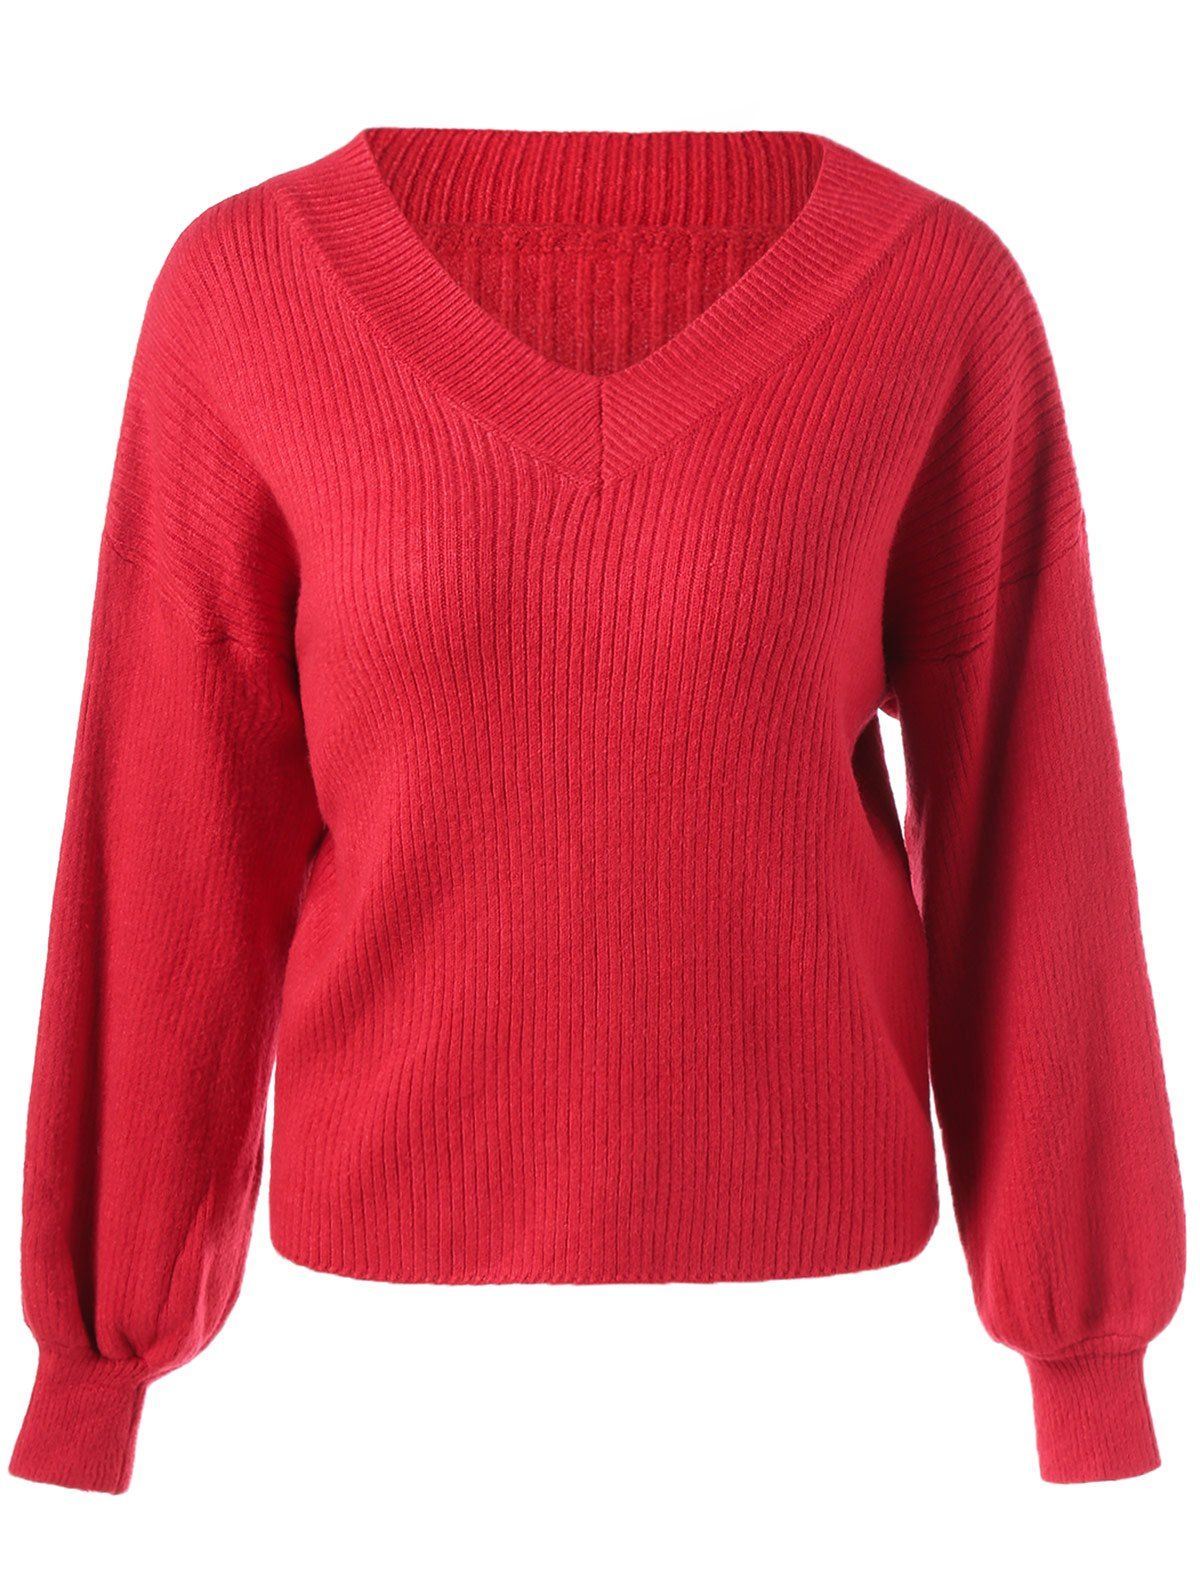 [17% OFF] 2020 Chunky Ribbed Sweater In RED | DressLily